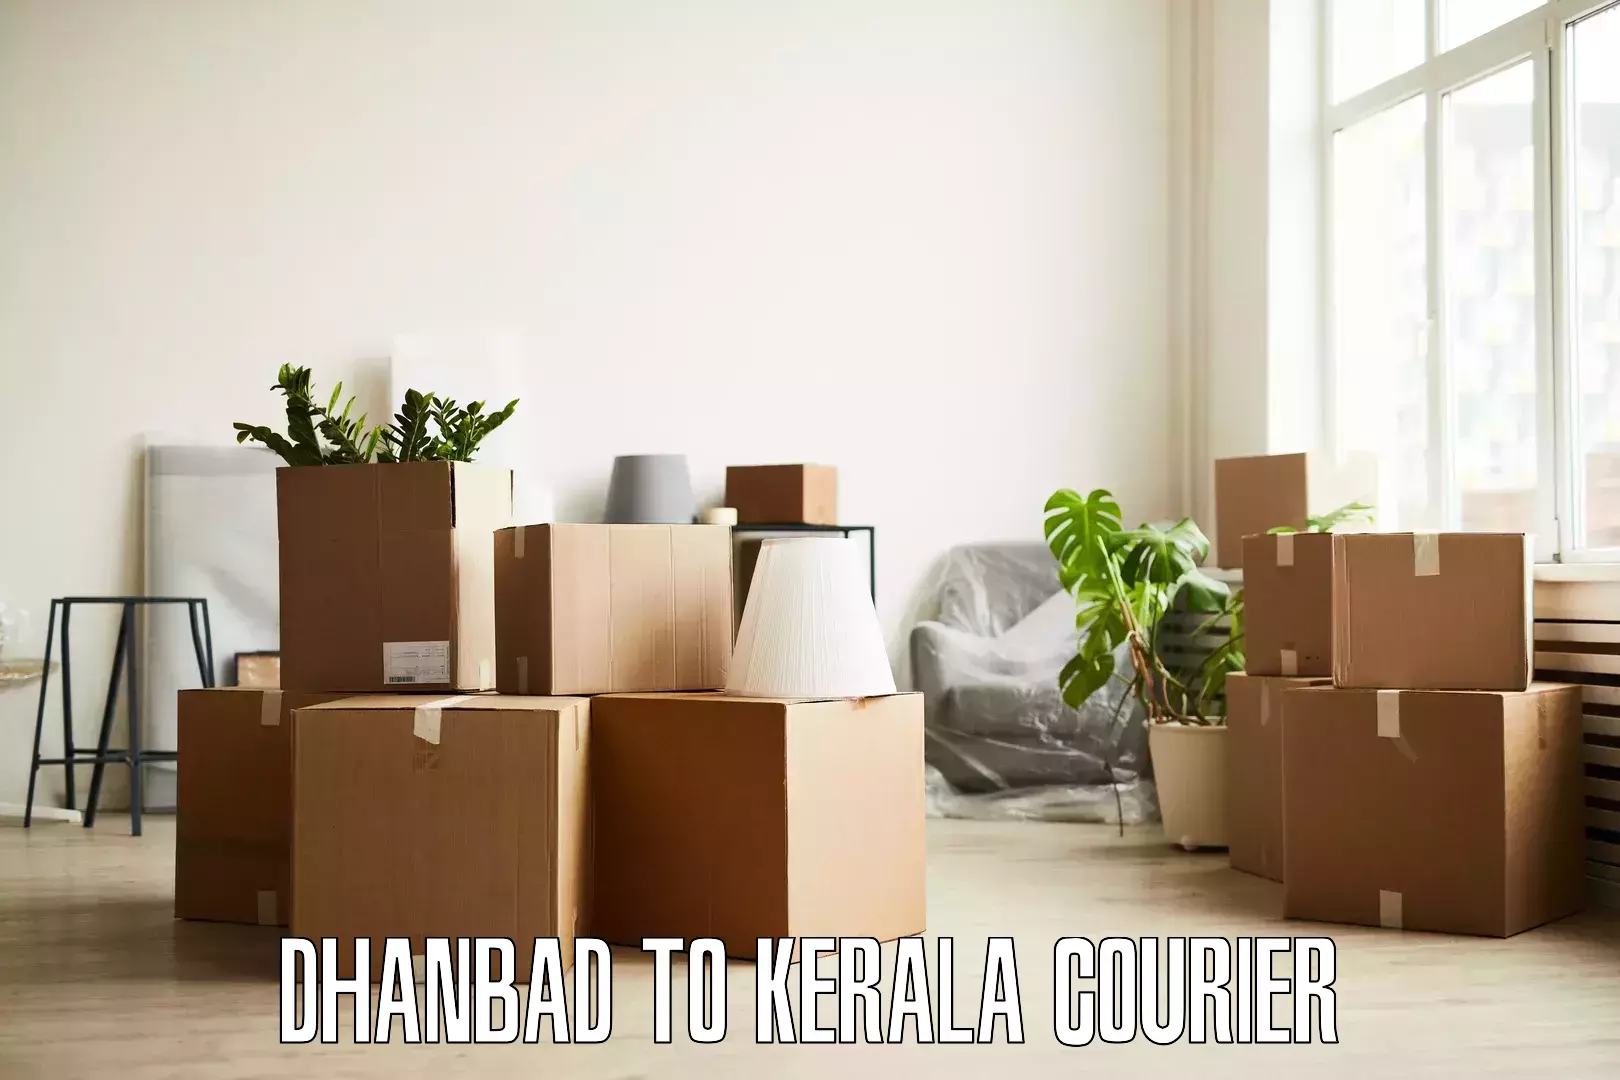 Furniture transport specialists Dhanbad to Pala